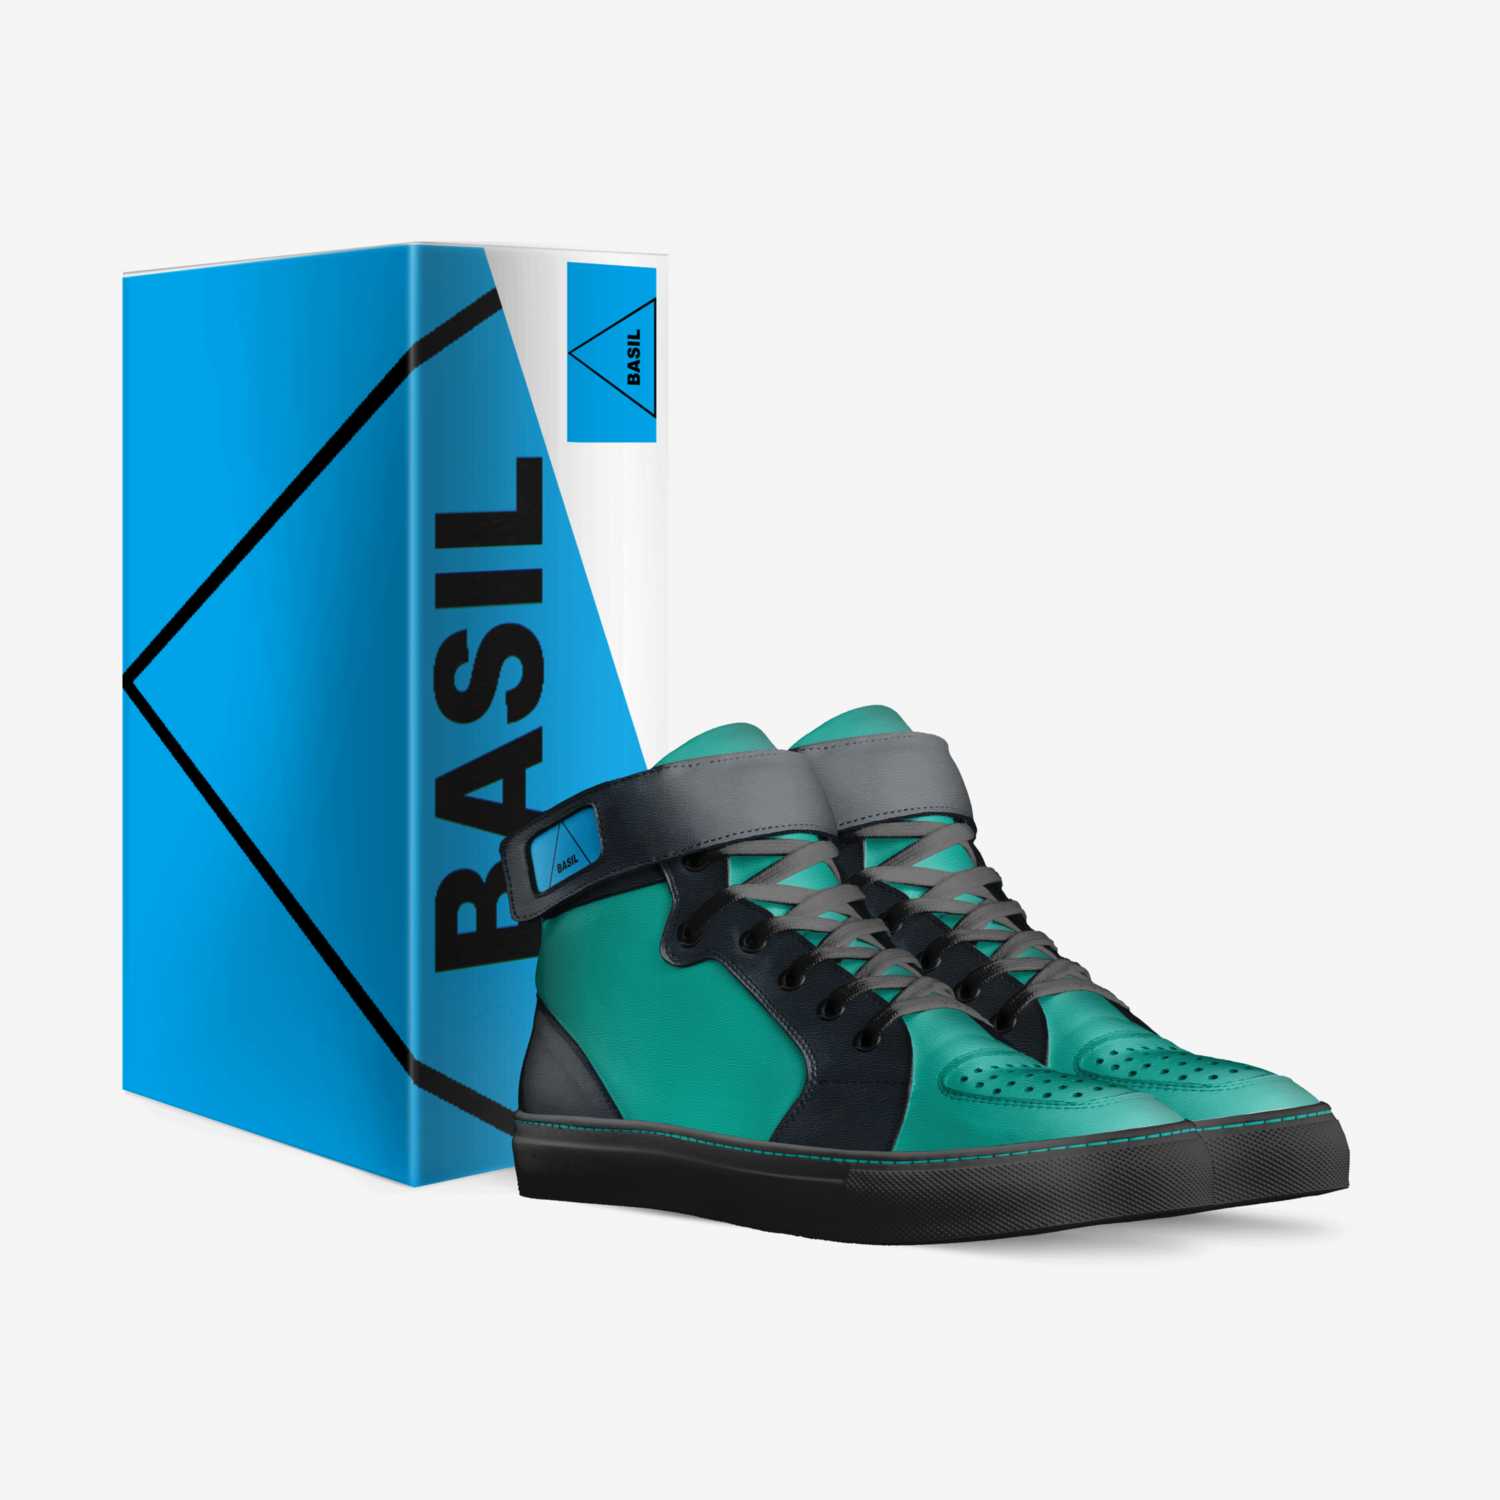 BASIL custom made in Italy shoes by Basil | Box view